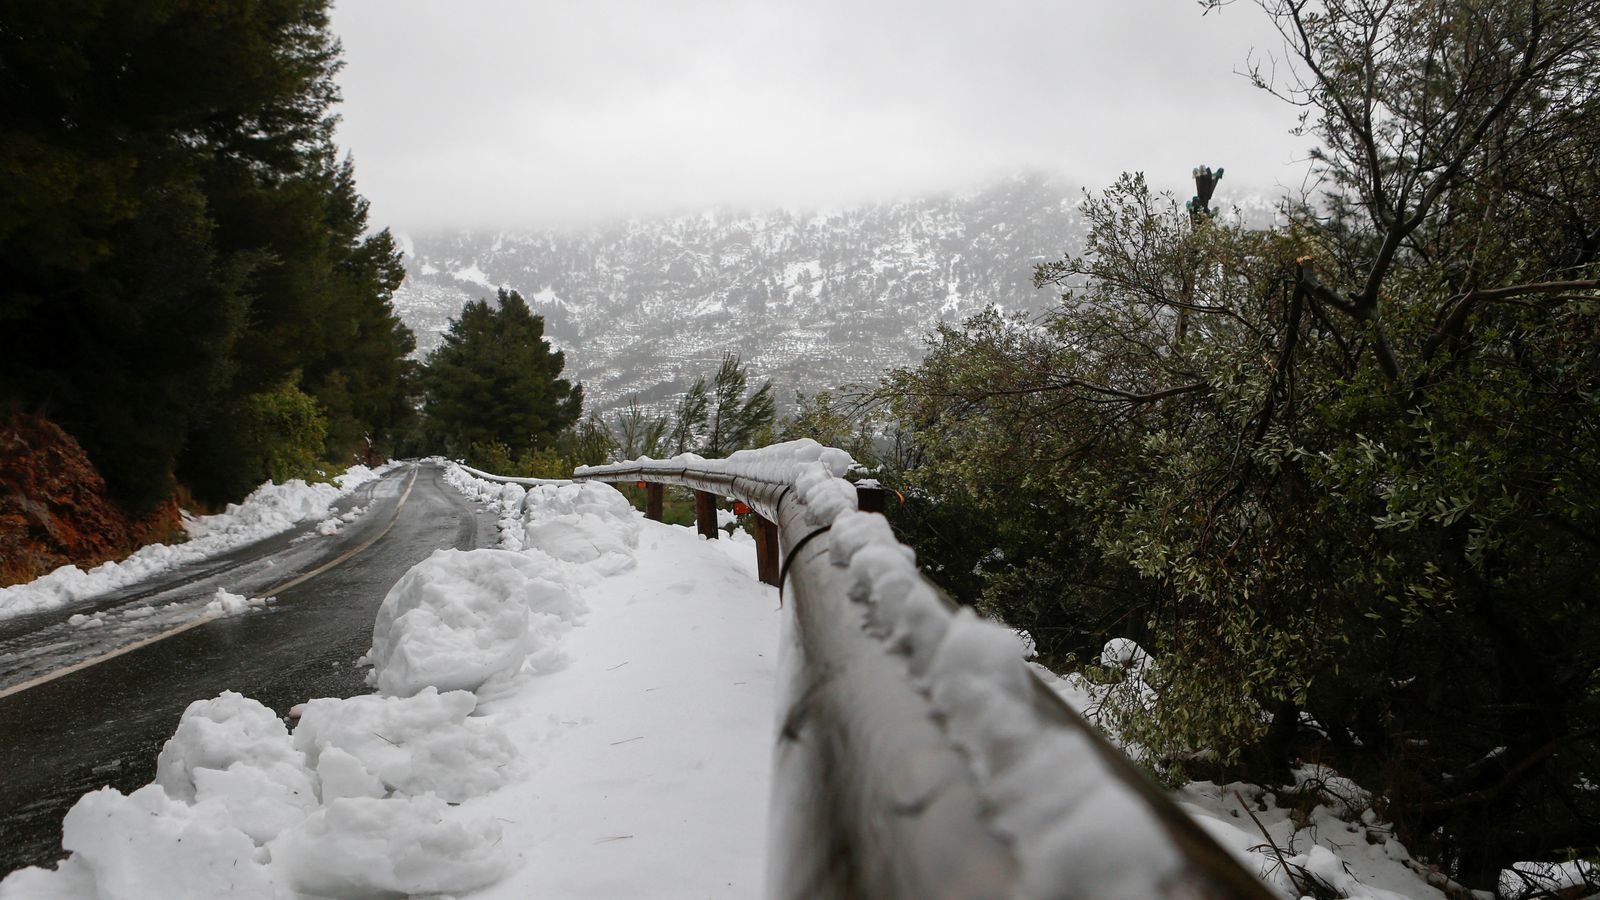 Mallorca hit by heavy snow as Storm Juliette hits Spain bringing